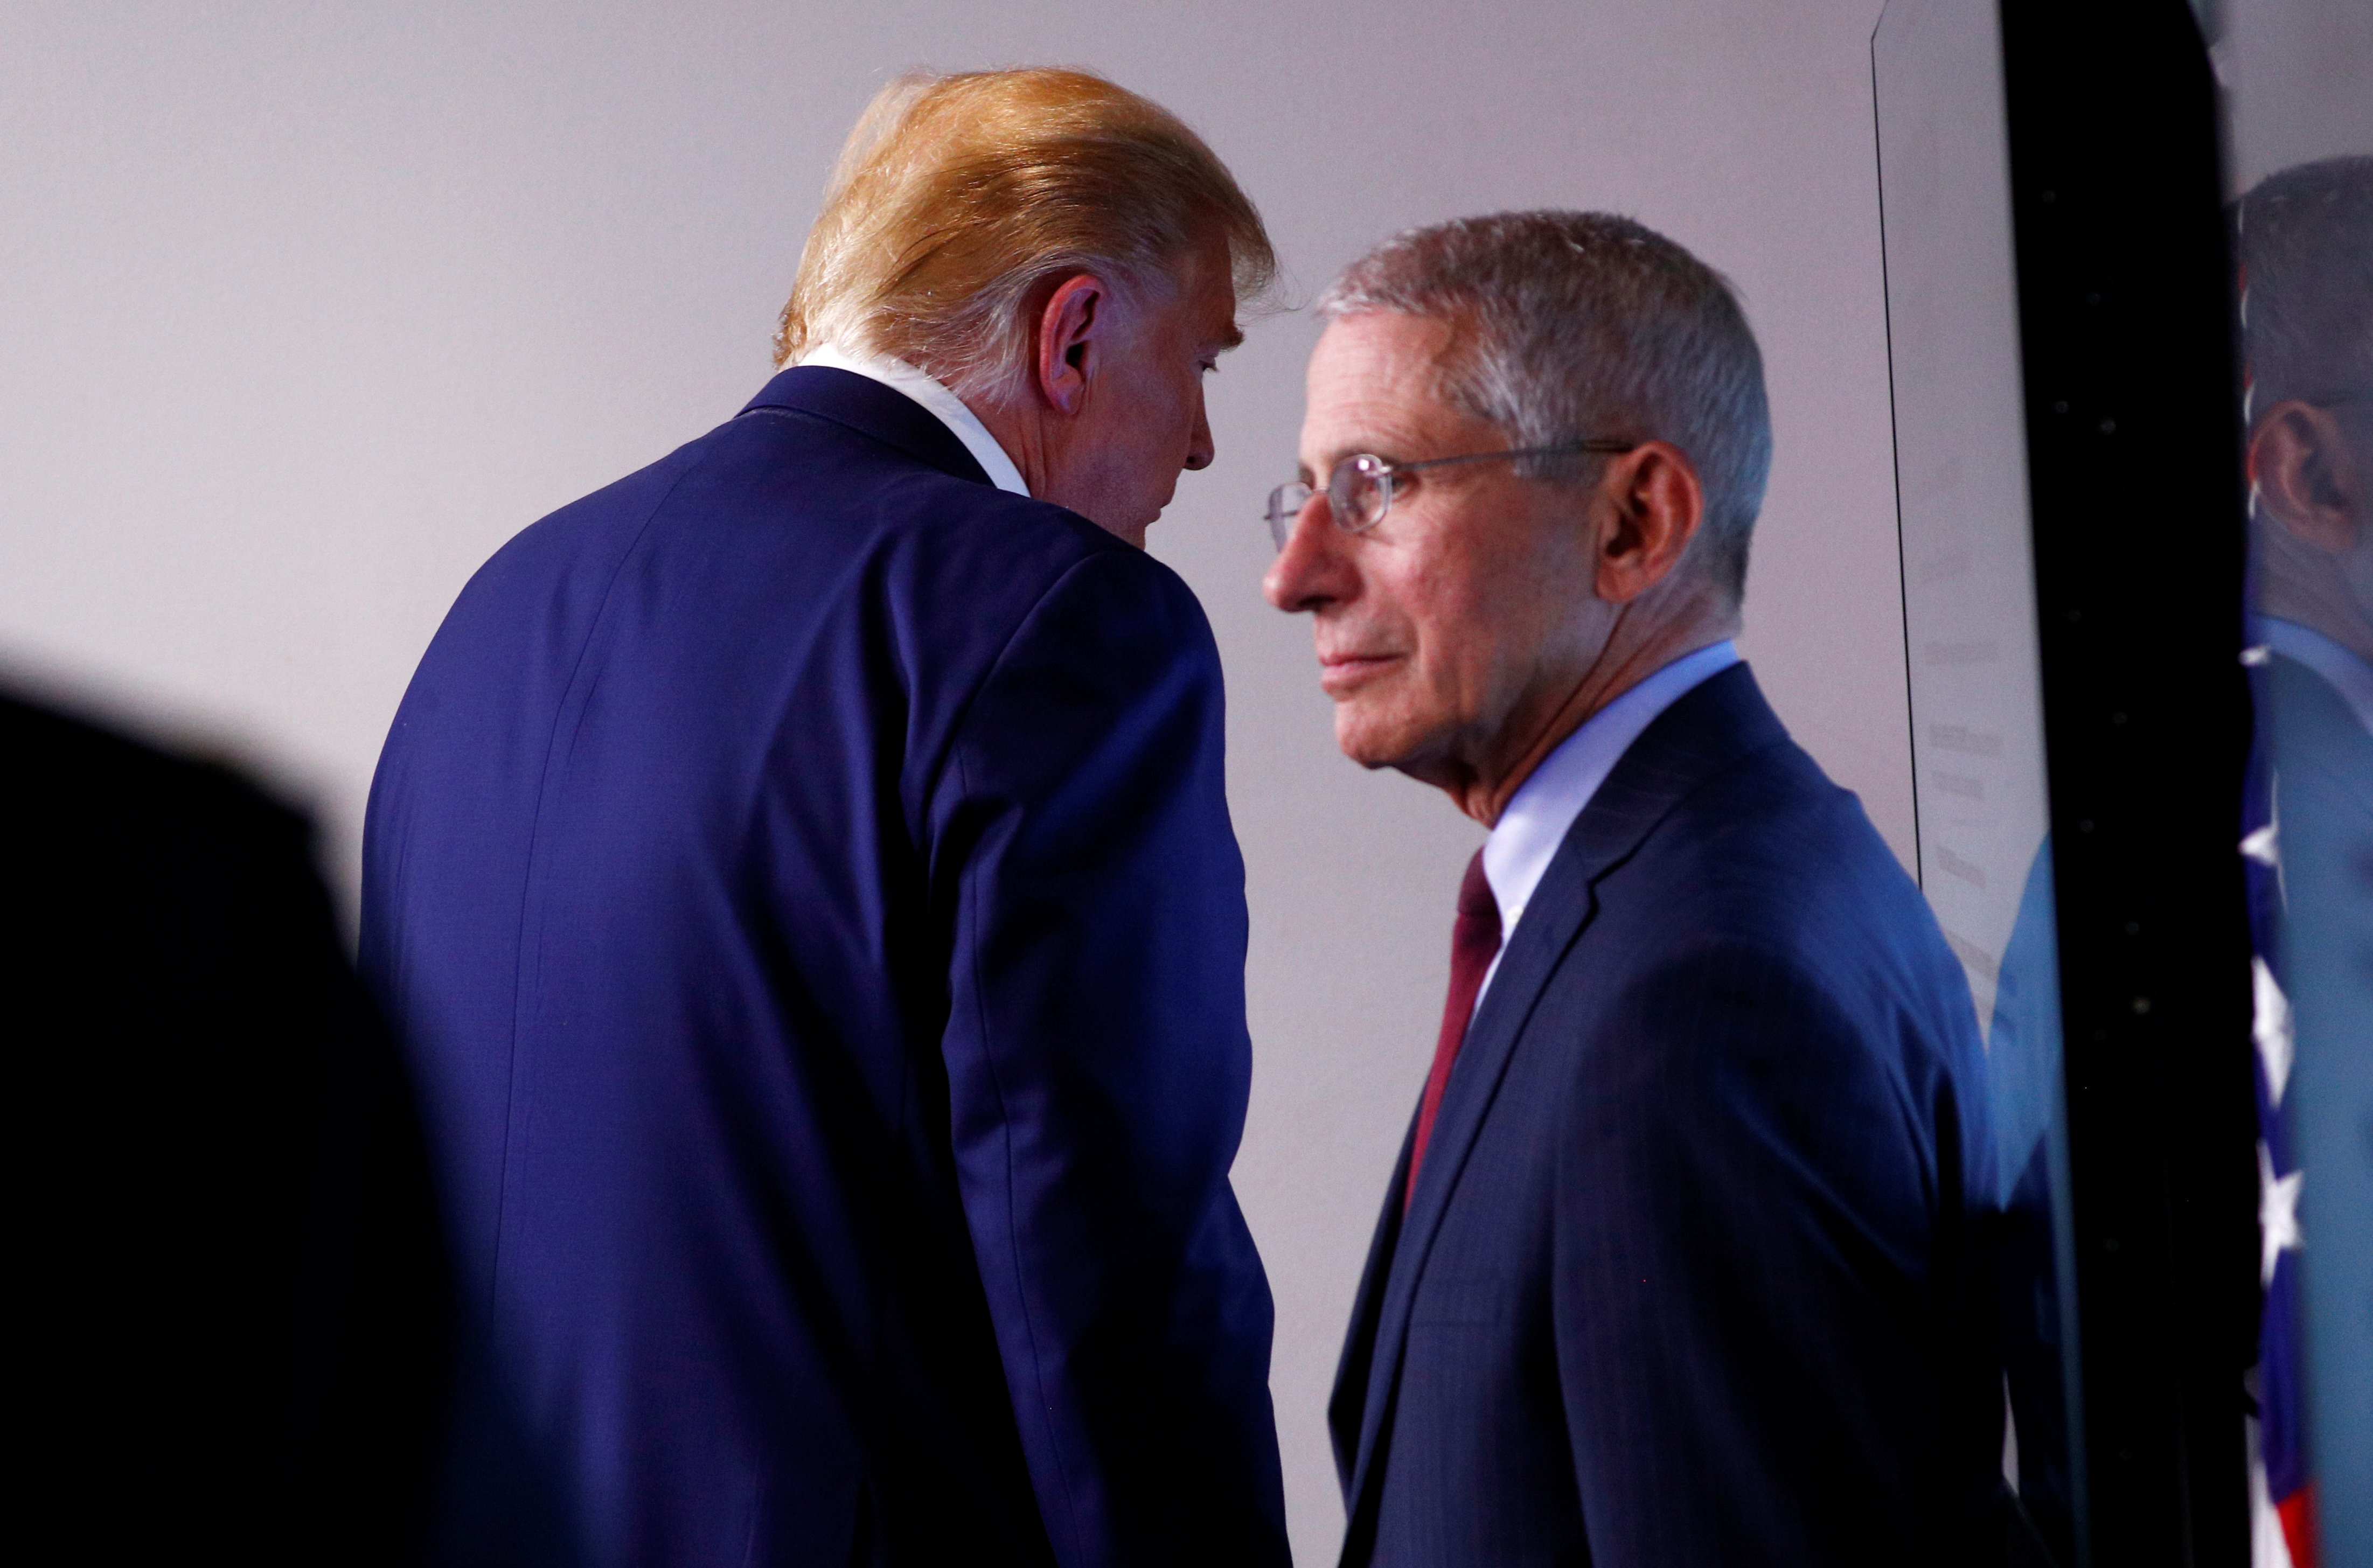 U.S. President Donald Trump leaves the room past Dr. Anthony Fauci, Director of the National Institute of Allergy and Infectious Diseases, at the conclusion of the daily coronavirus response briefing at the White House in Washington, U.S., March 31, 2020. REUTERS/Tom Brenner